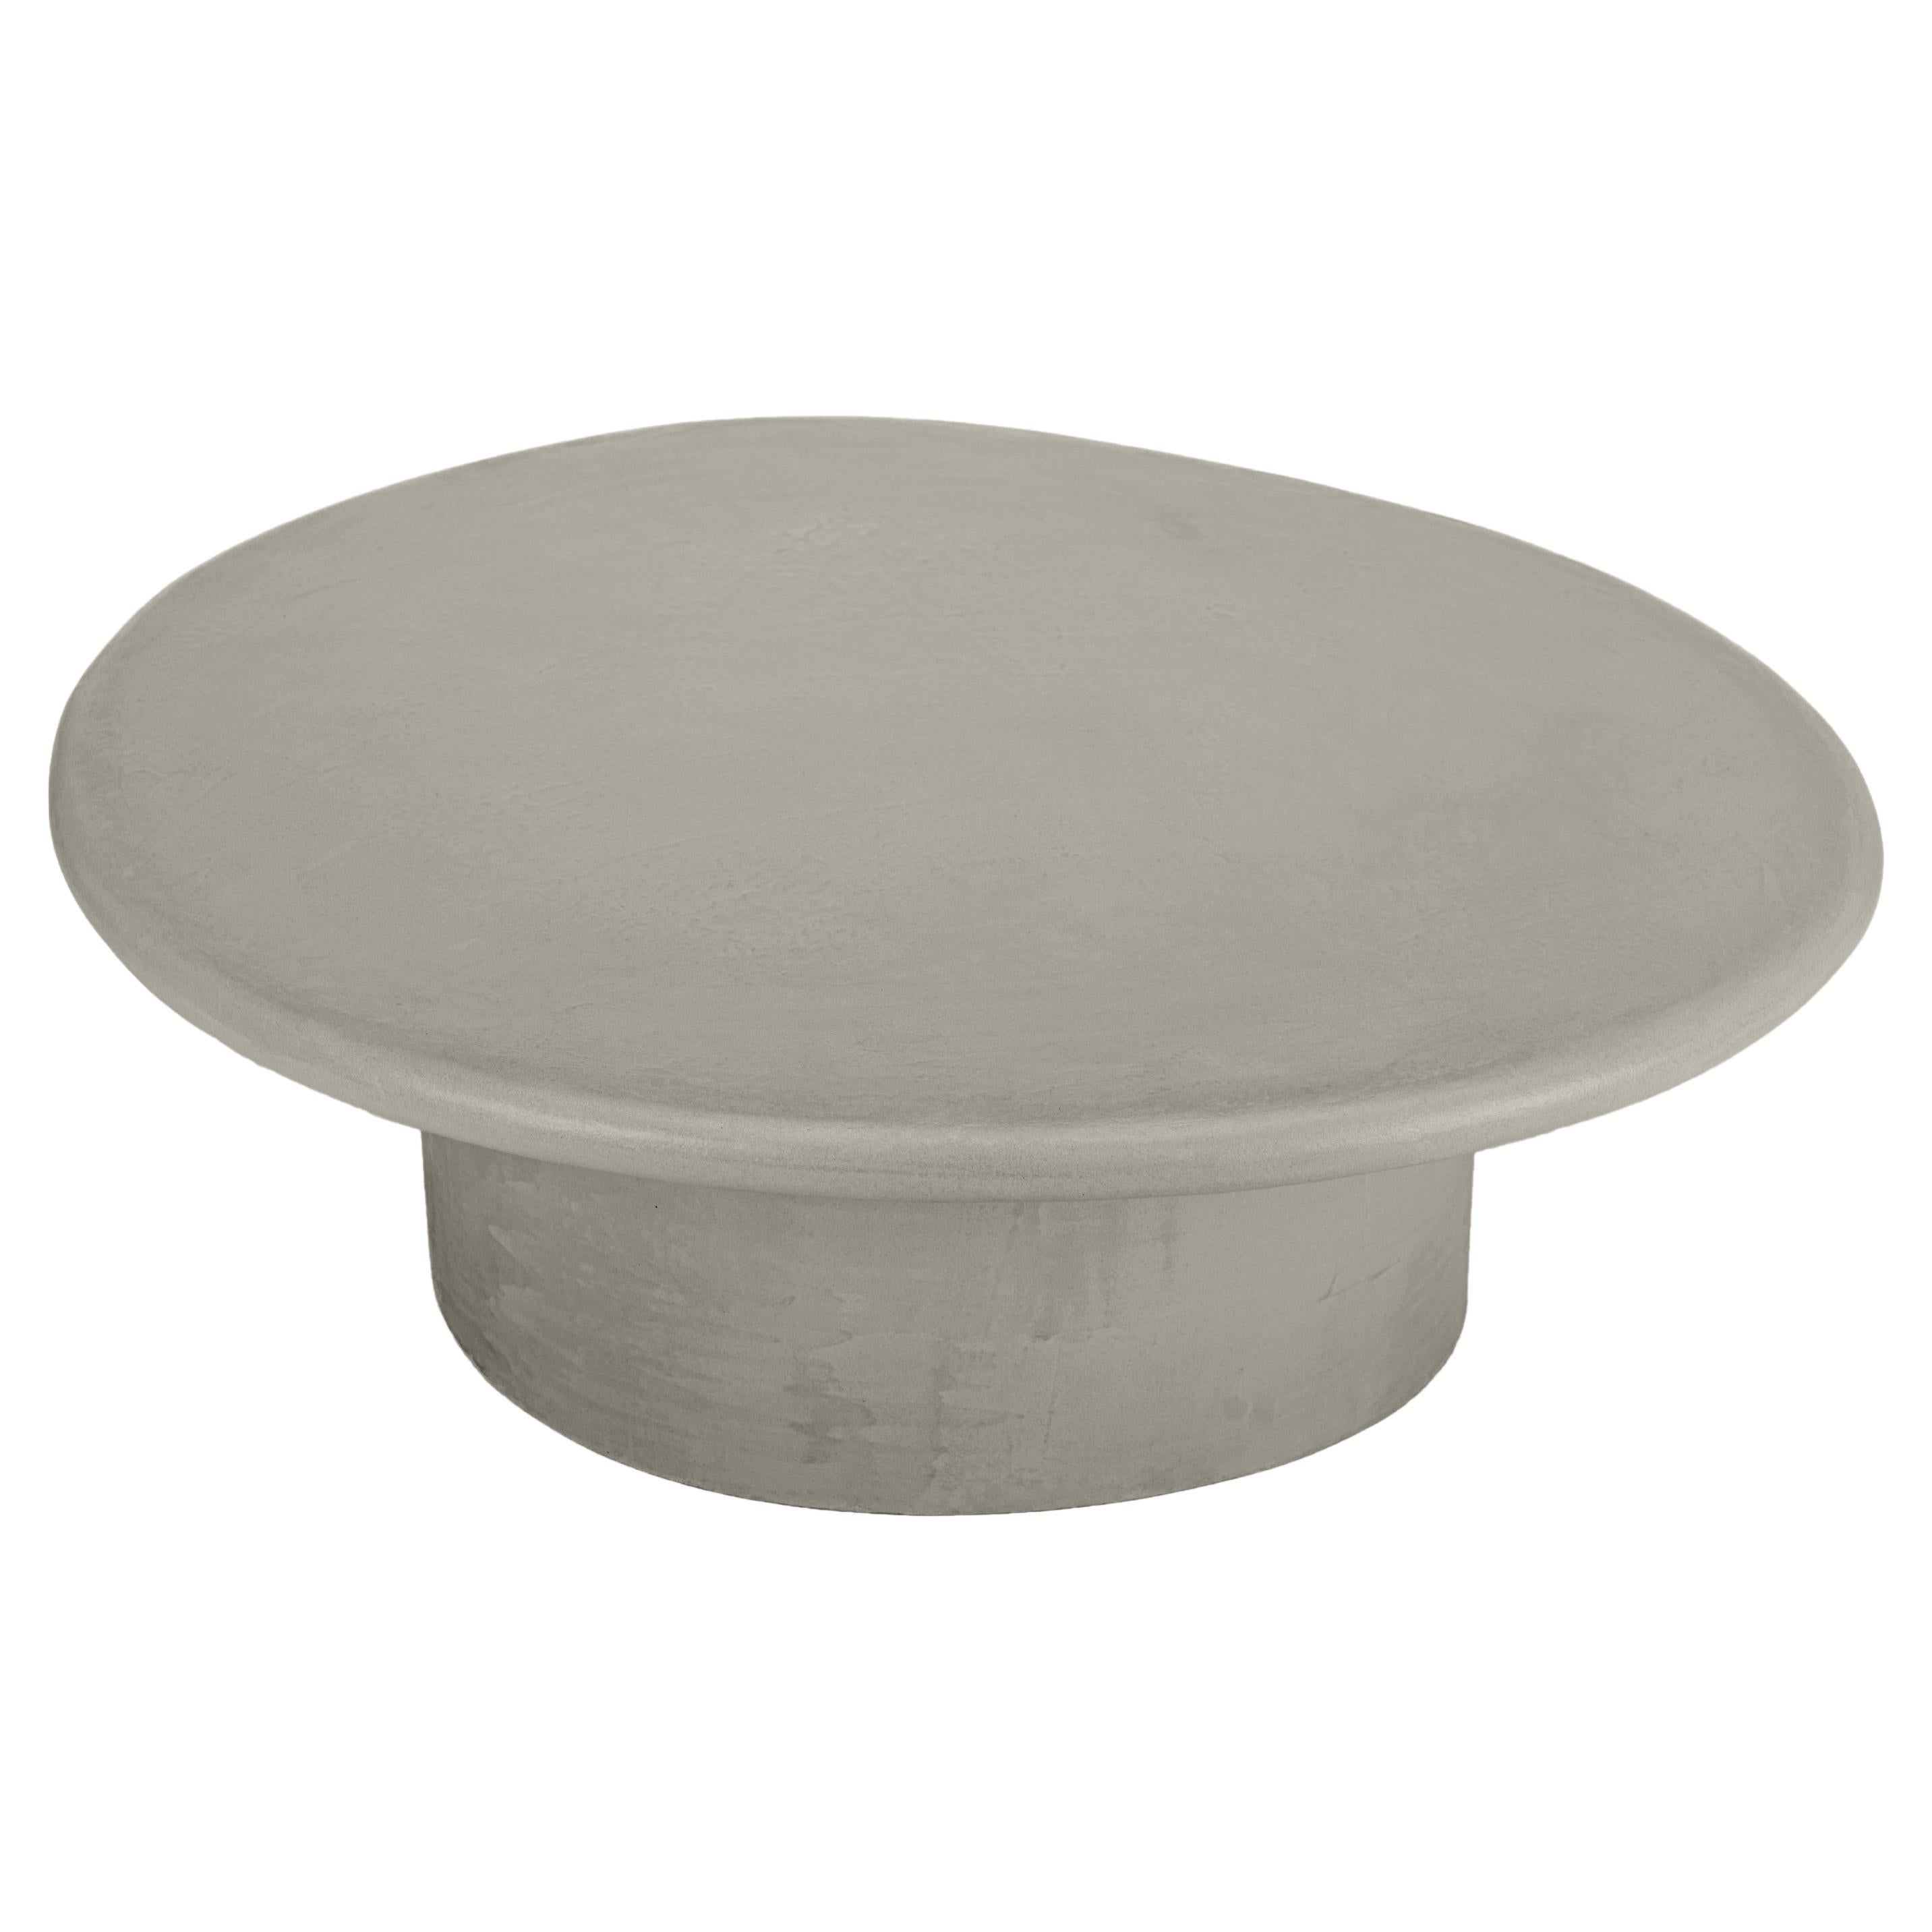 Organic Shaped Natural Plaster Coffee Table "Sami" by Isabelle Beaumont For Sale